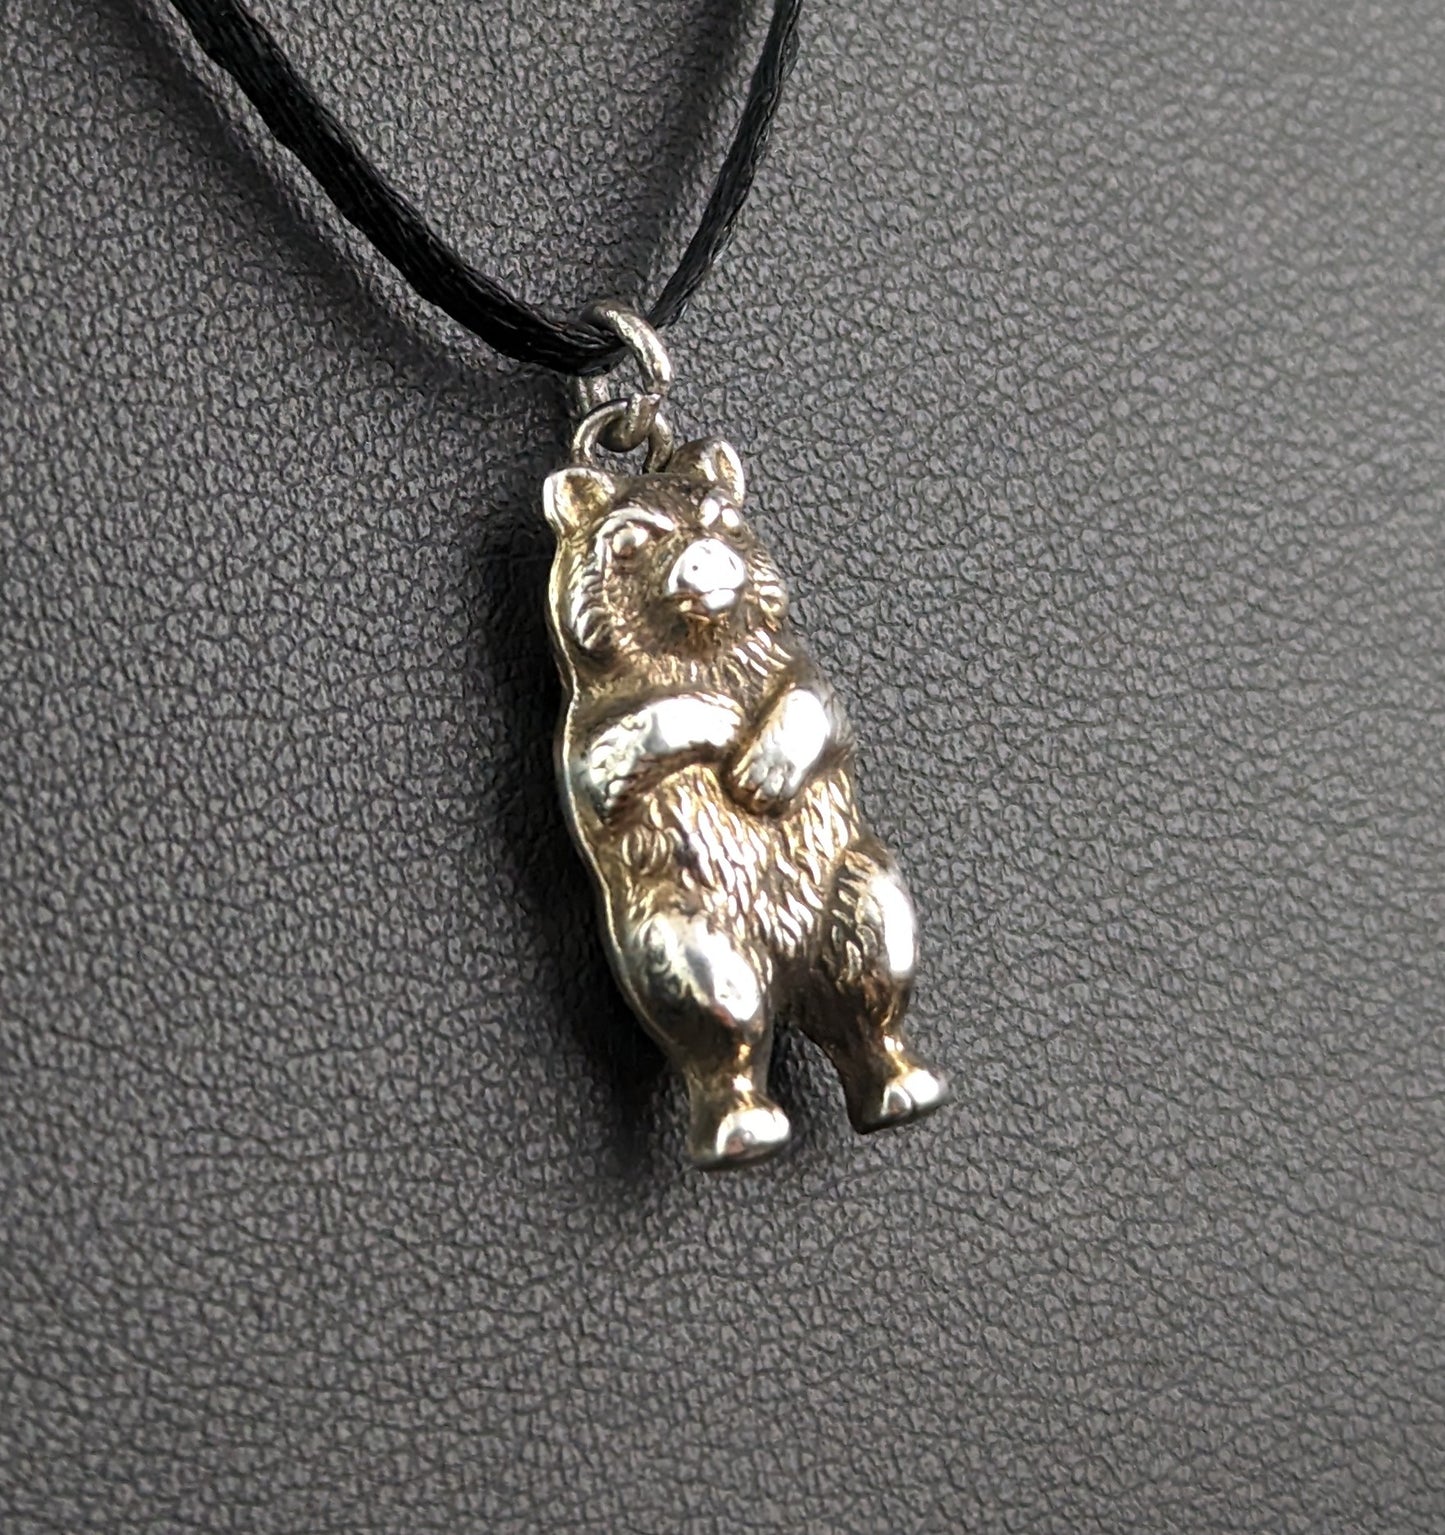 Antique Victorian sterling silver Bear charm, pendant